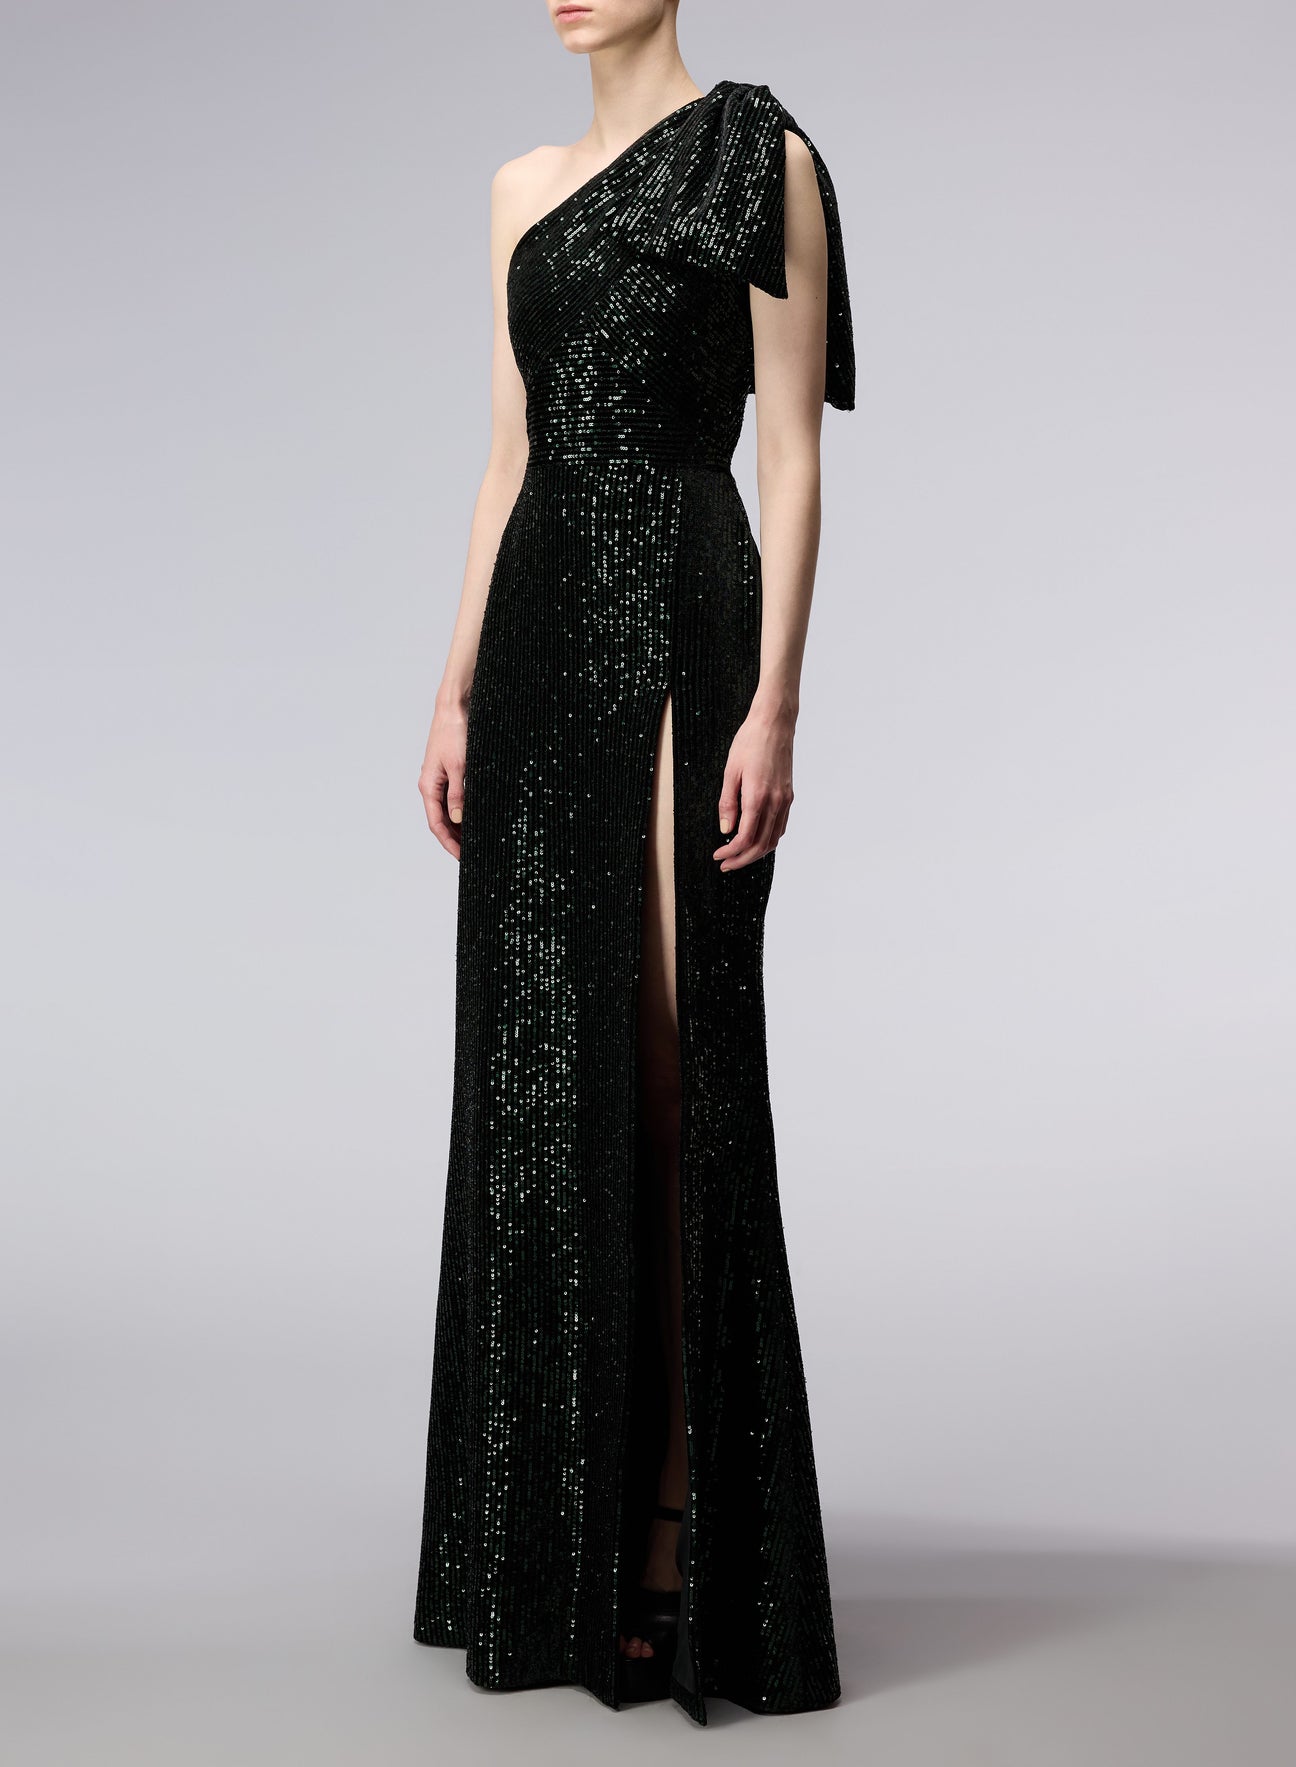 Designer Ready-to-Wear Dresses for Women - ELIE SAAB – Page 3